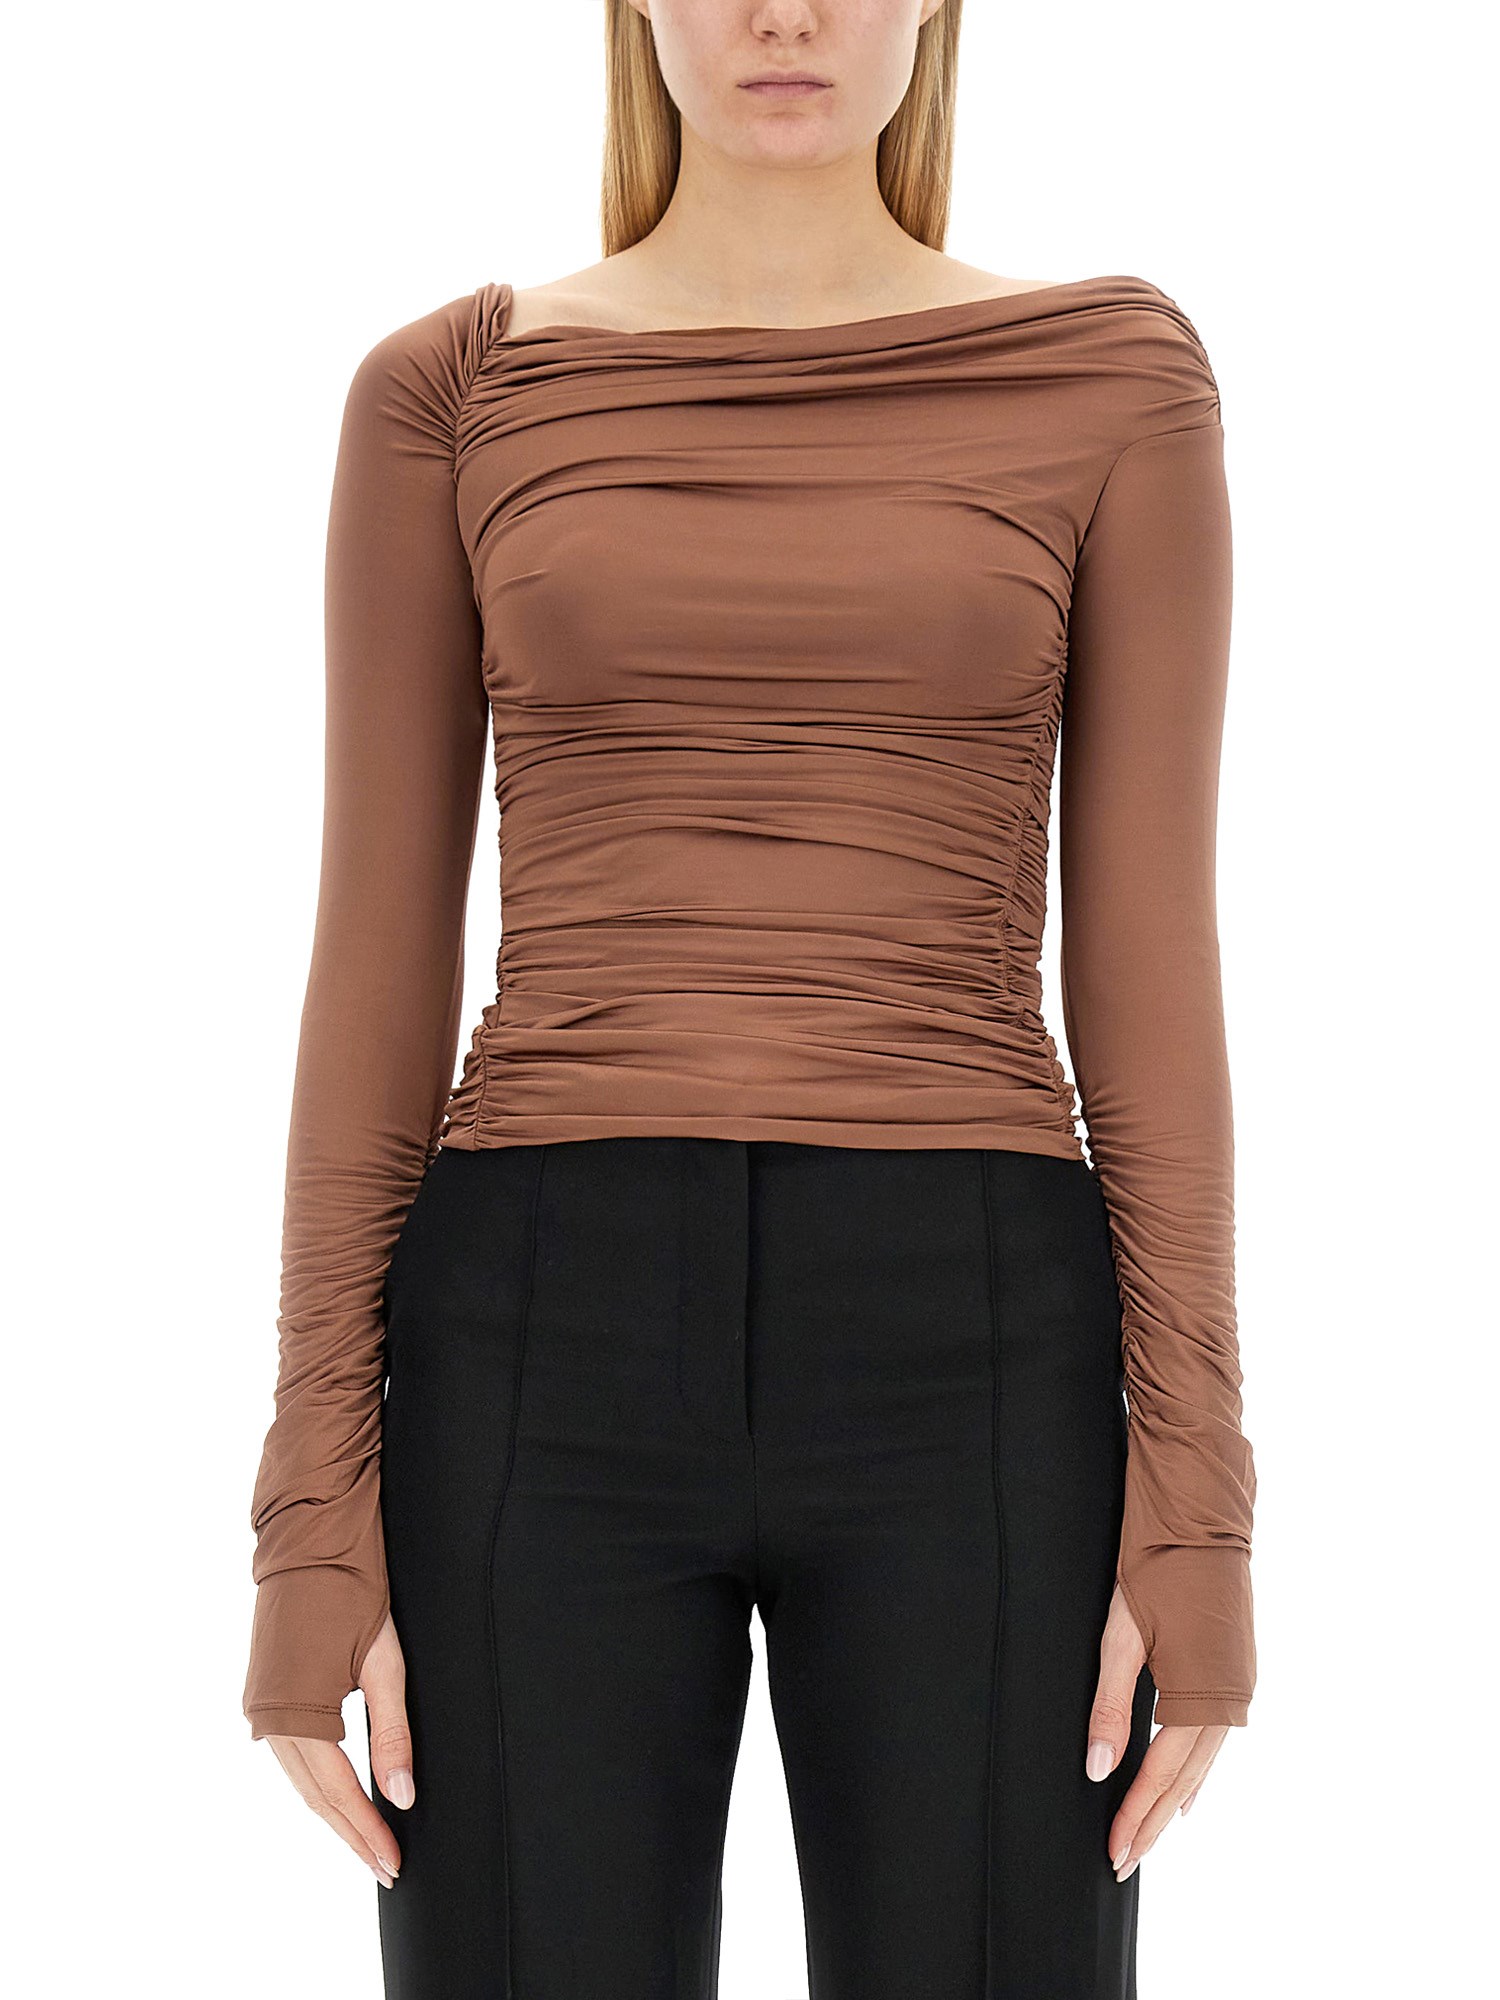 helmut lang top with ruffles